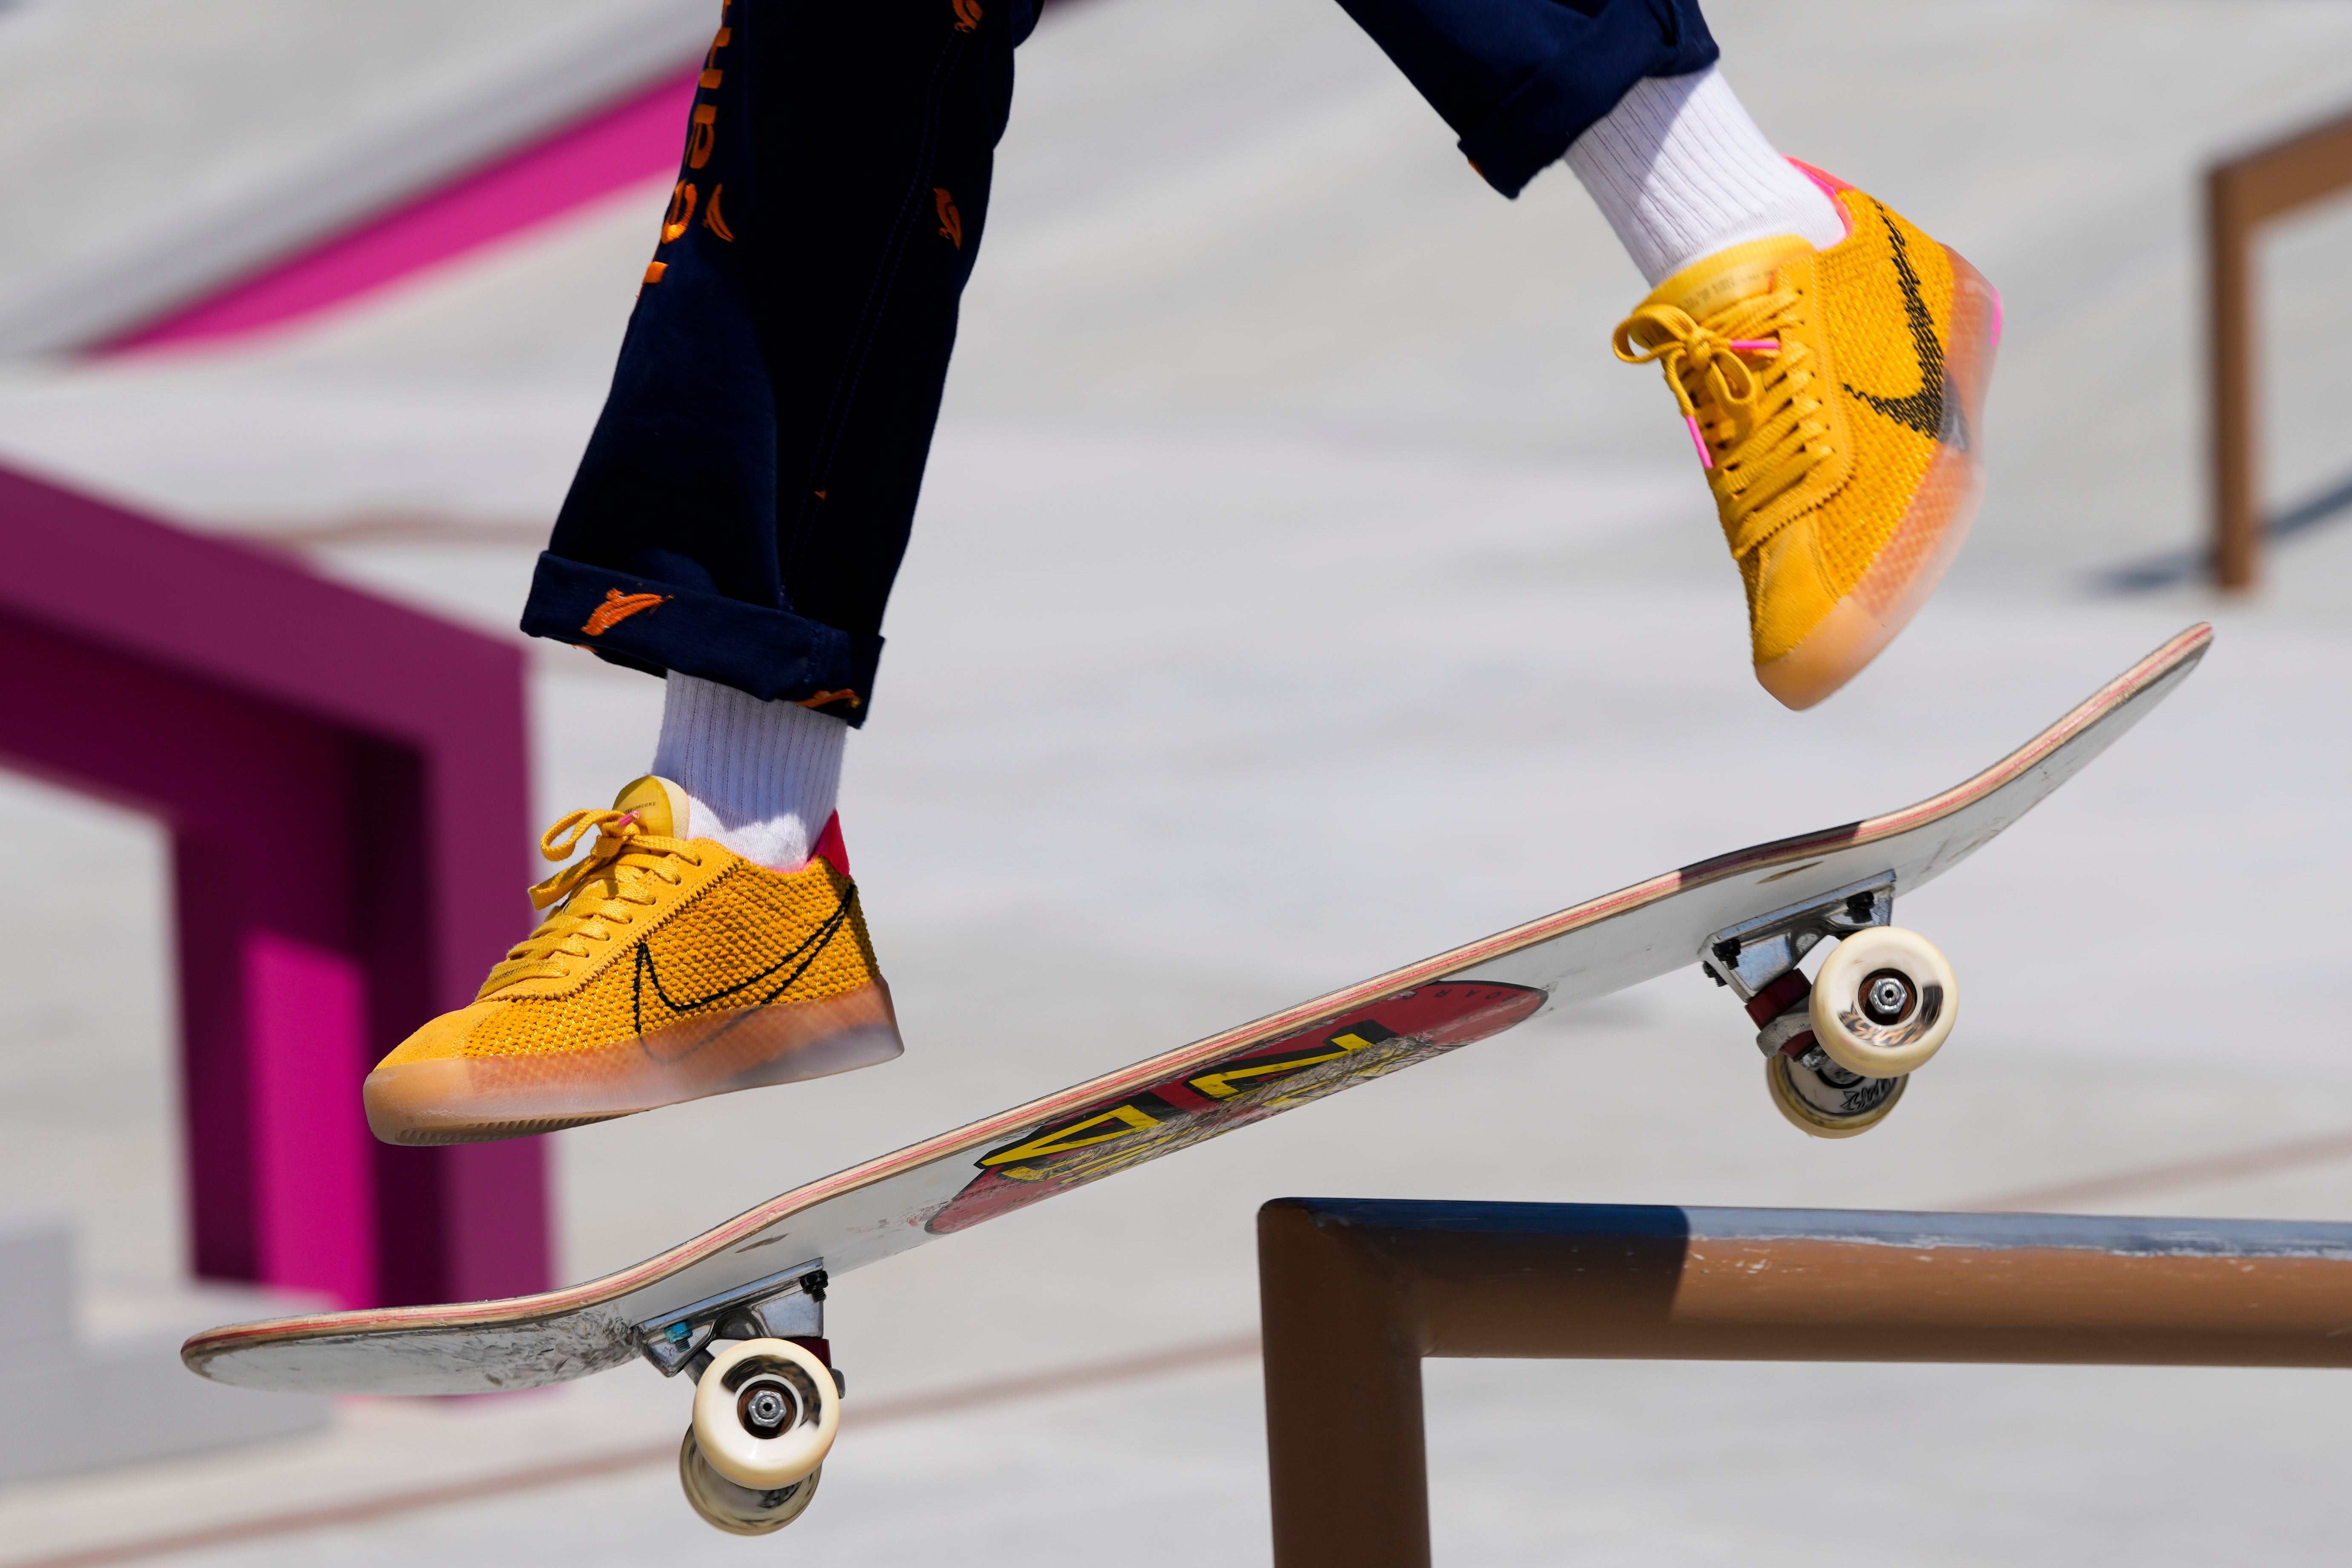 Skateboarding at Tokyo Olympics How is it judged and what are the